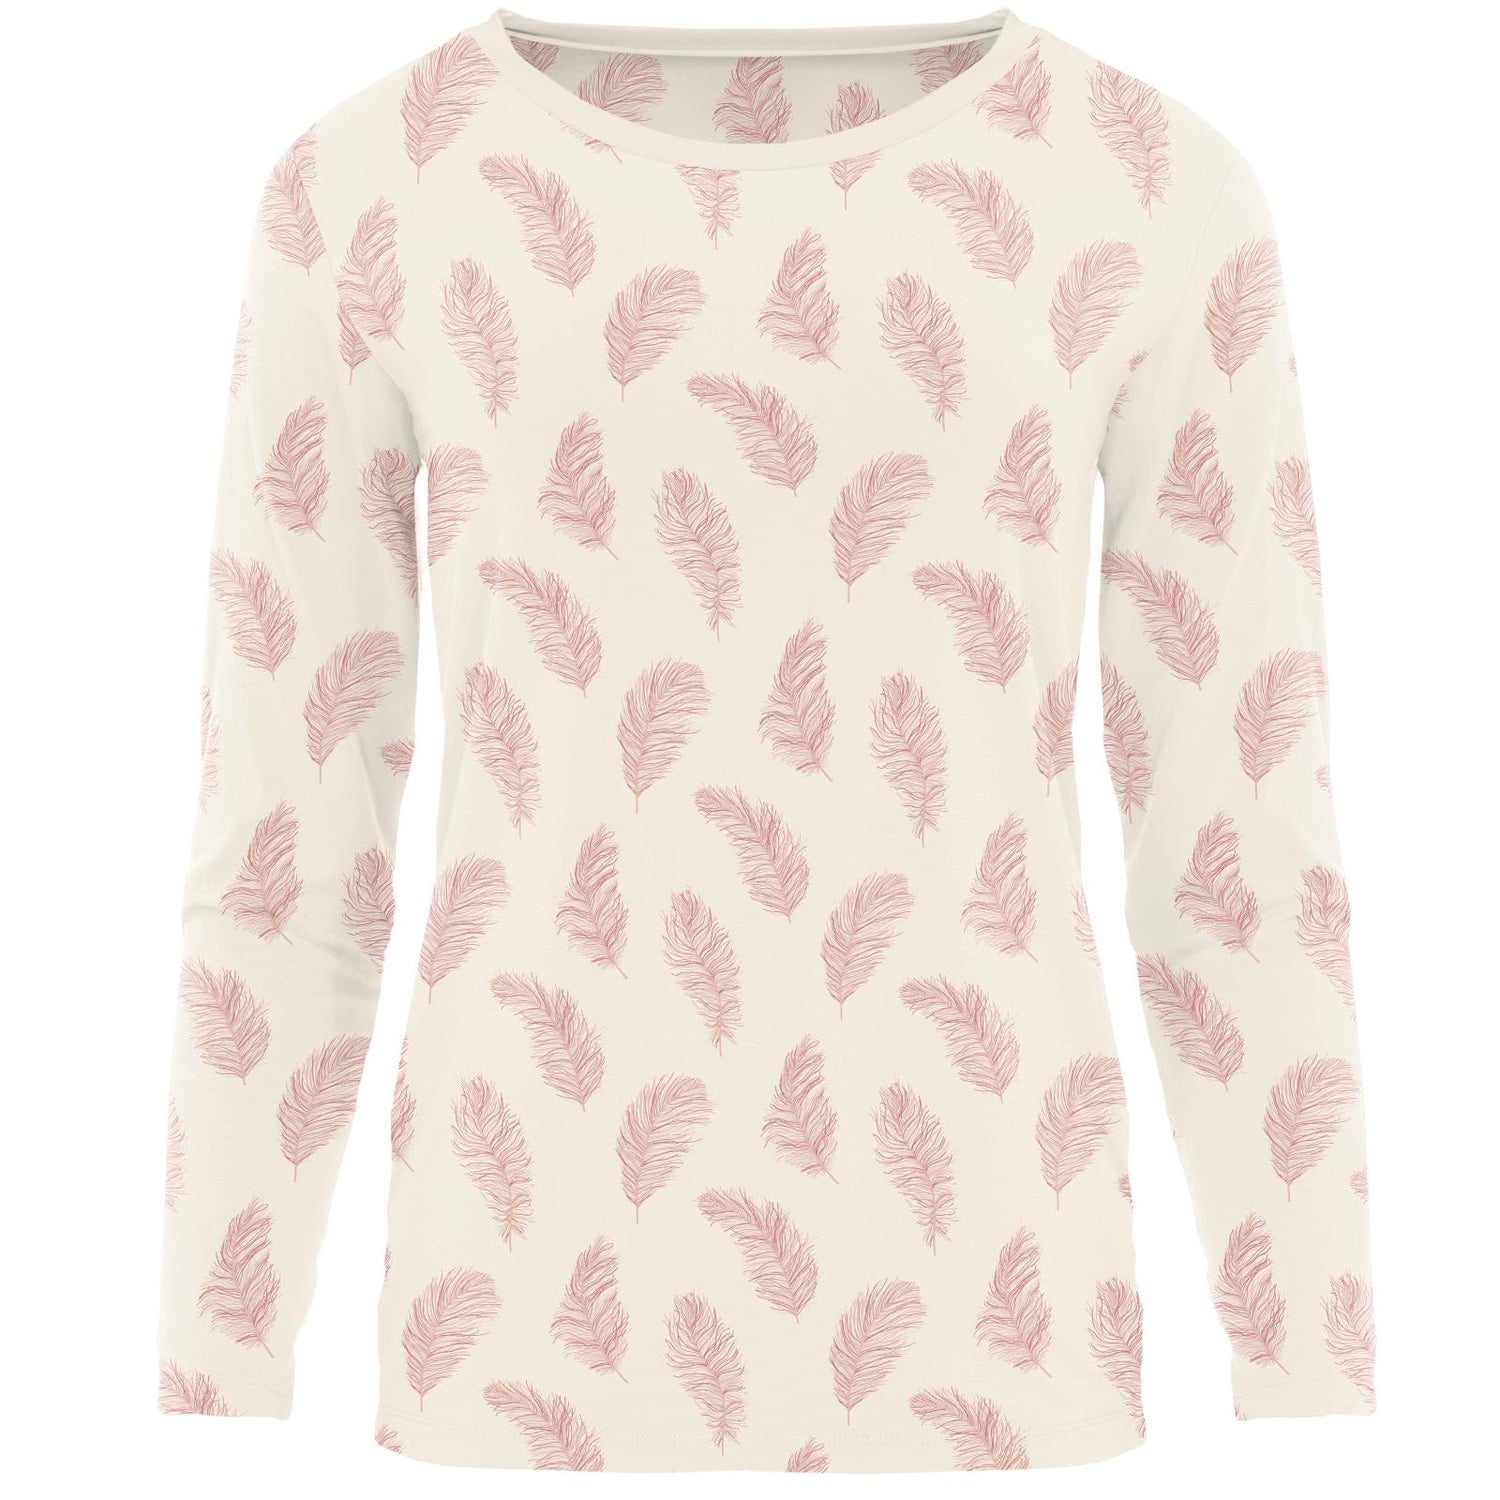 Women's Print Long Sleeve Loosey Goosey Tee in Natural Feathers